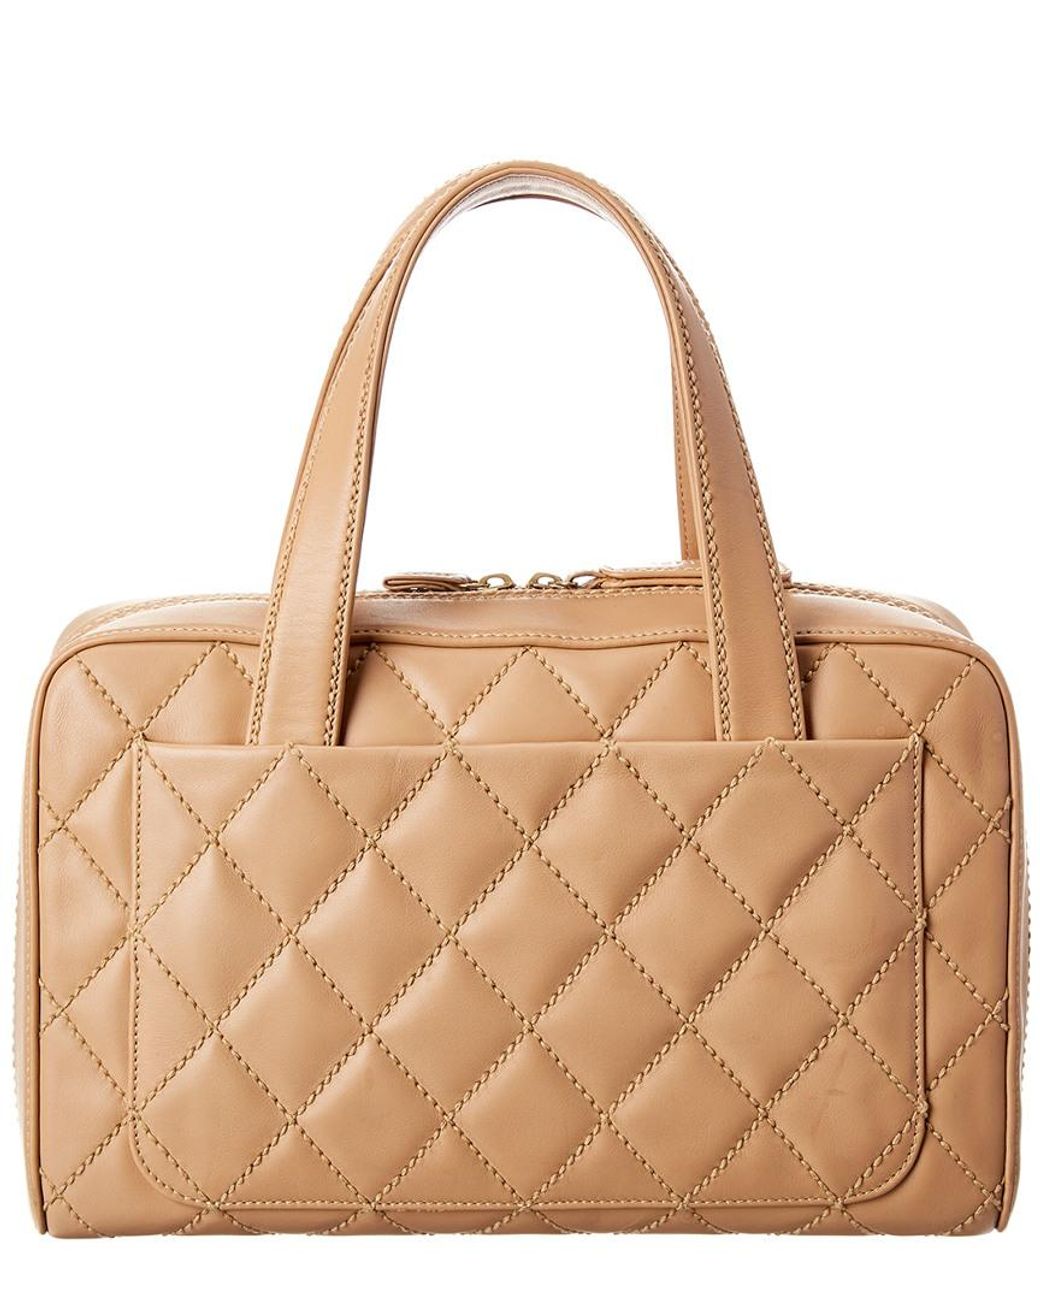 Natural Beige Tote Bag with Quilted Wild Stitch Leather and Black Contrast  Stitching, 2000-2002, Holiday Handbags & Accessories, 2020